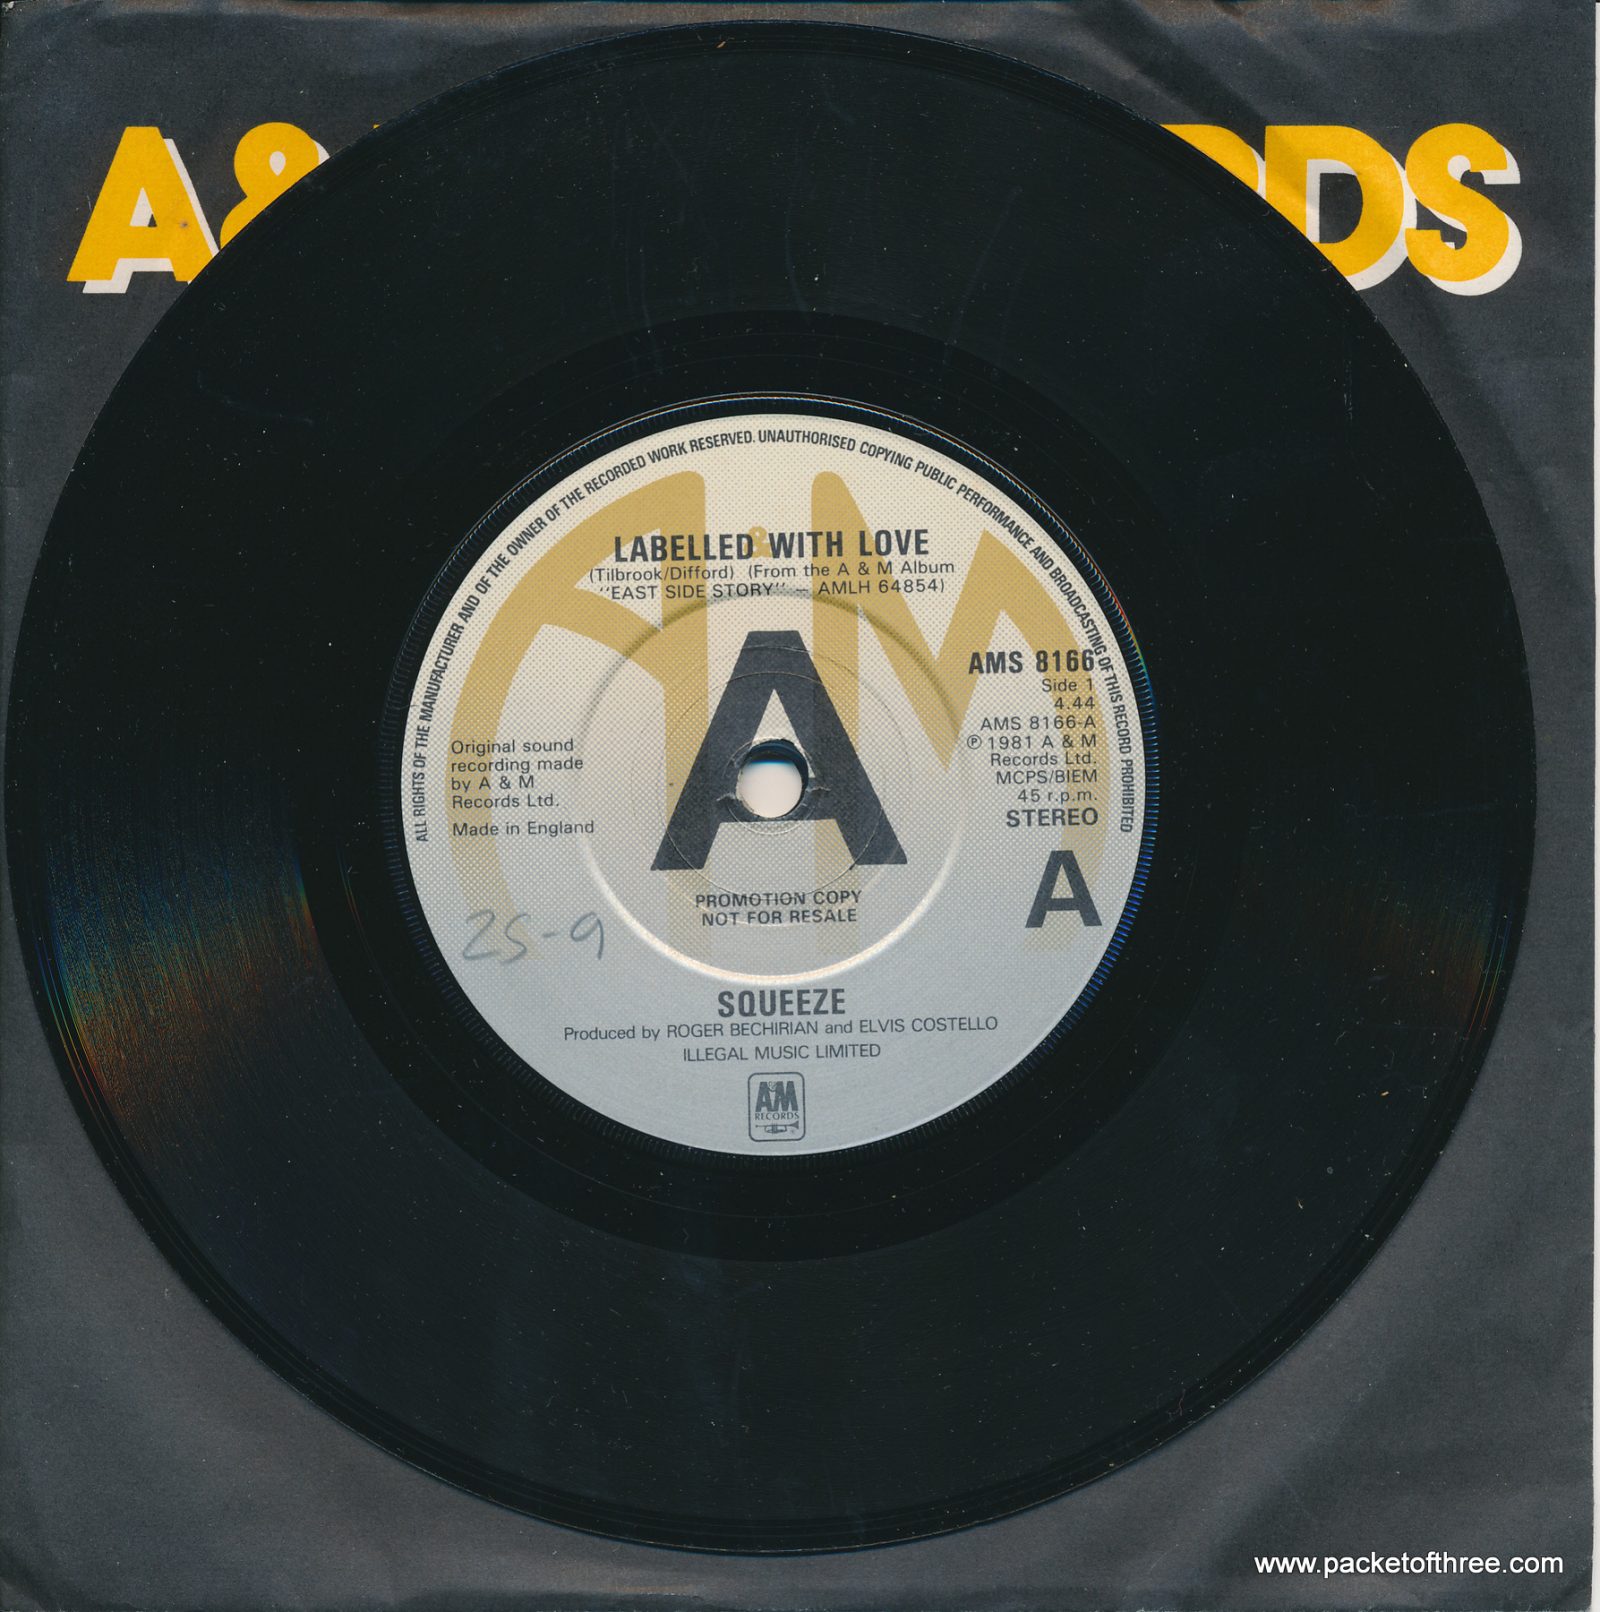 Labelled With Love - UK - 7" - promotional copy